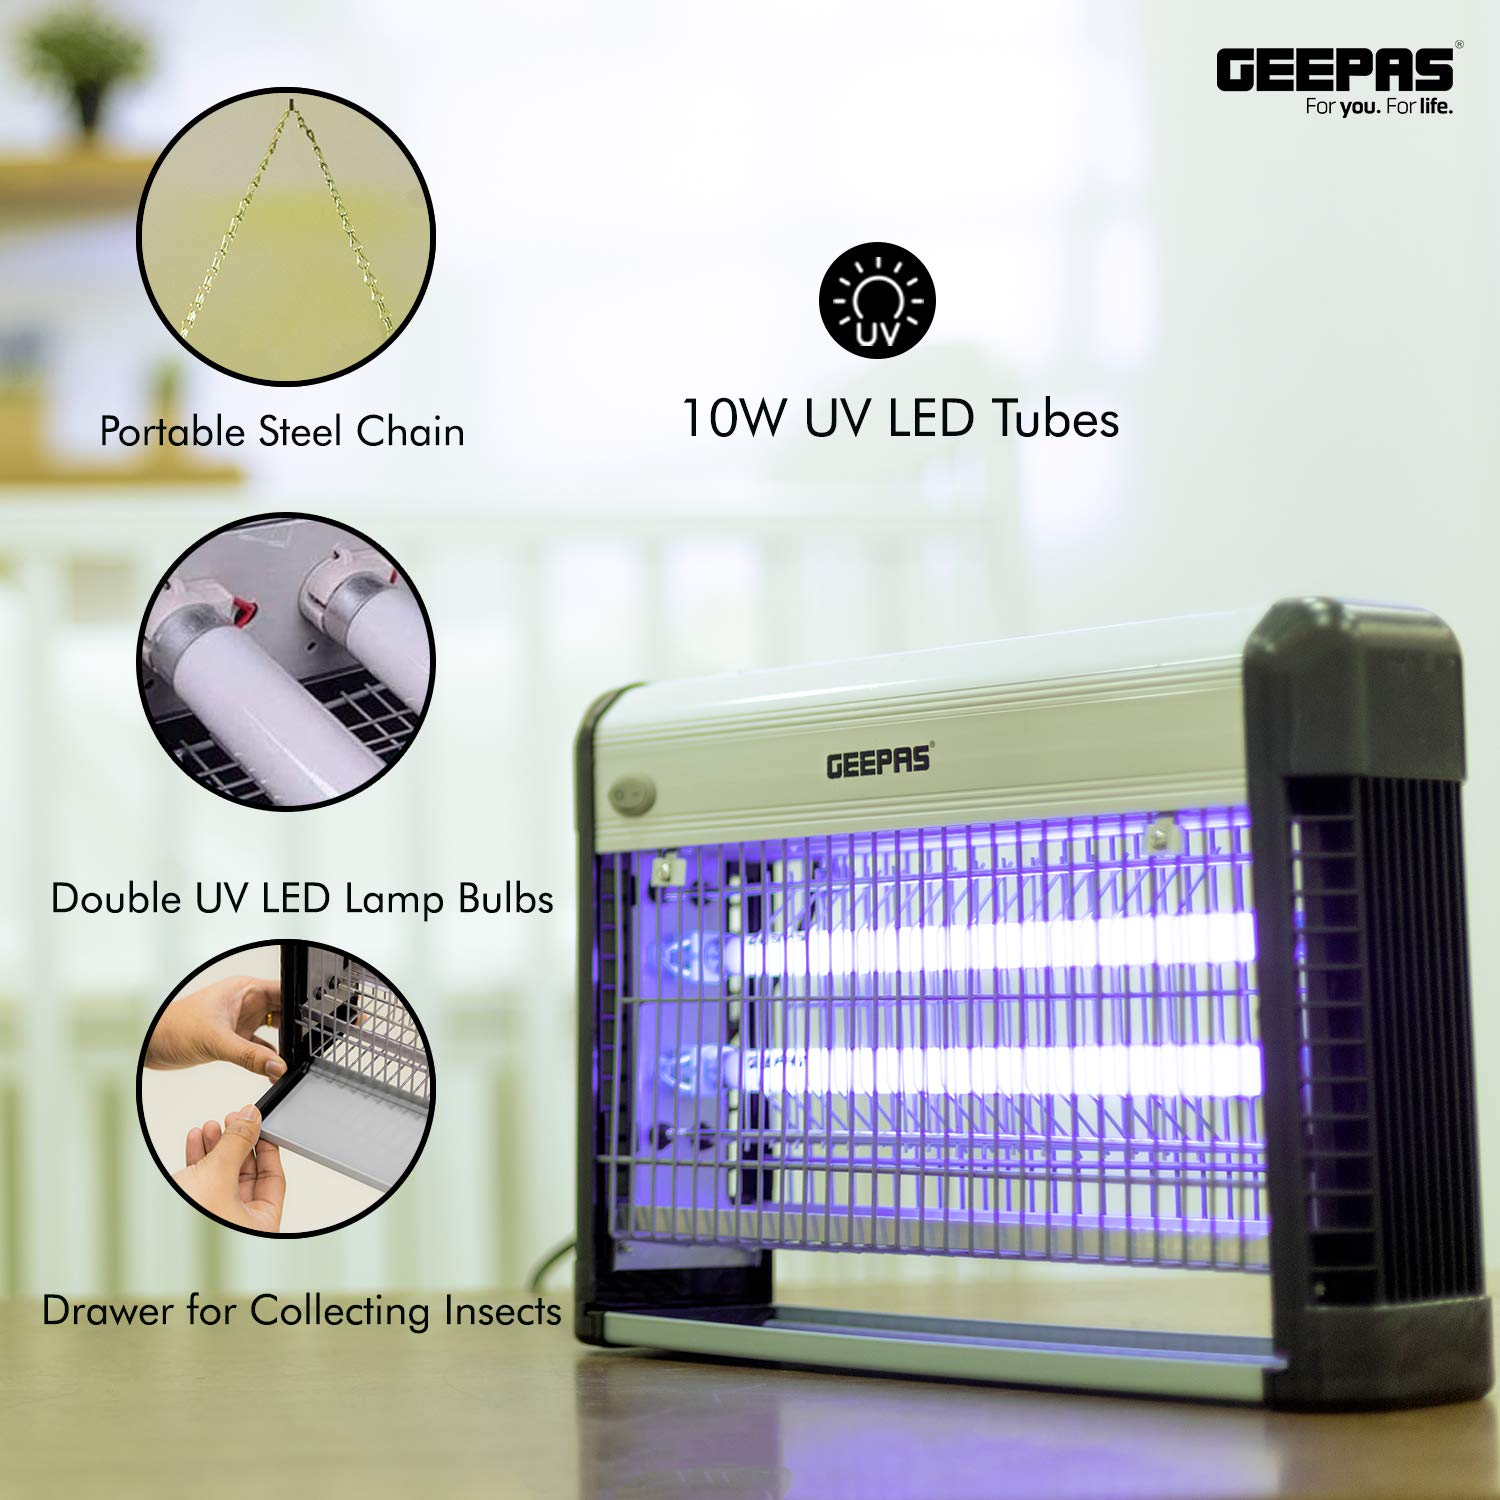 Geepas Fly and Insect Killer | Powerful Fly Zapper 20W UV Light | Professional Electric Bug Zapper, Insect Killer, Fly Killer, Wasp Killer | Insect Killing Mesh Grid, with Detachable Hang| 1 Year Warr